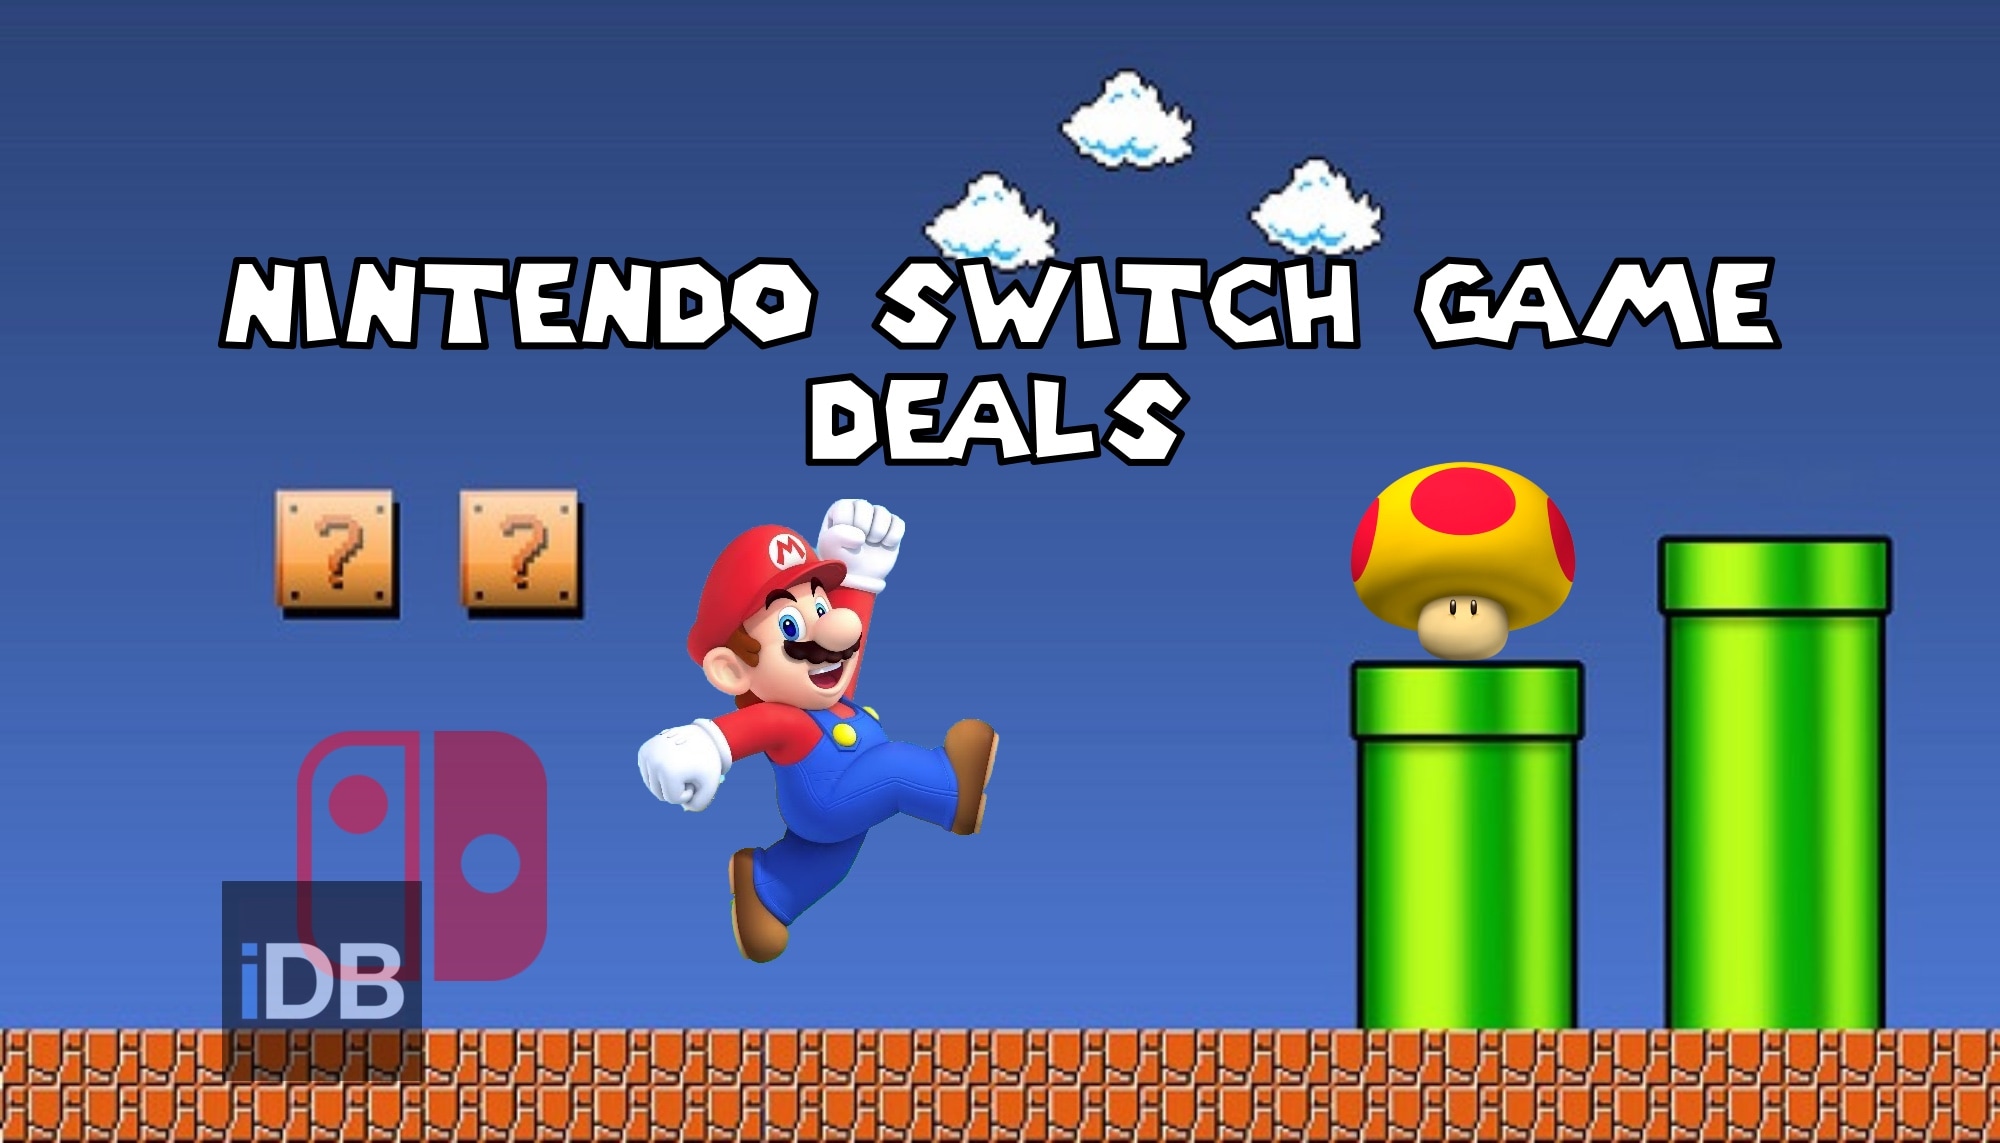 Great deals on Nintendo Switch games.